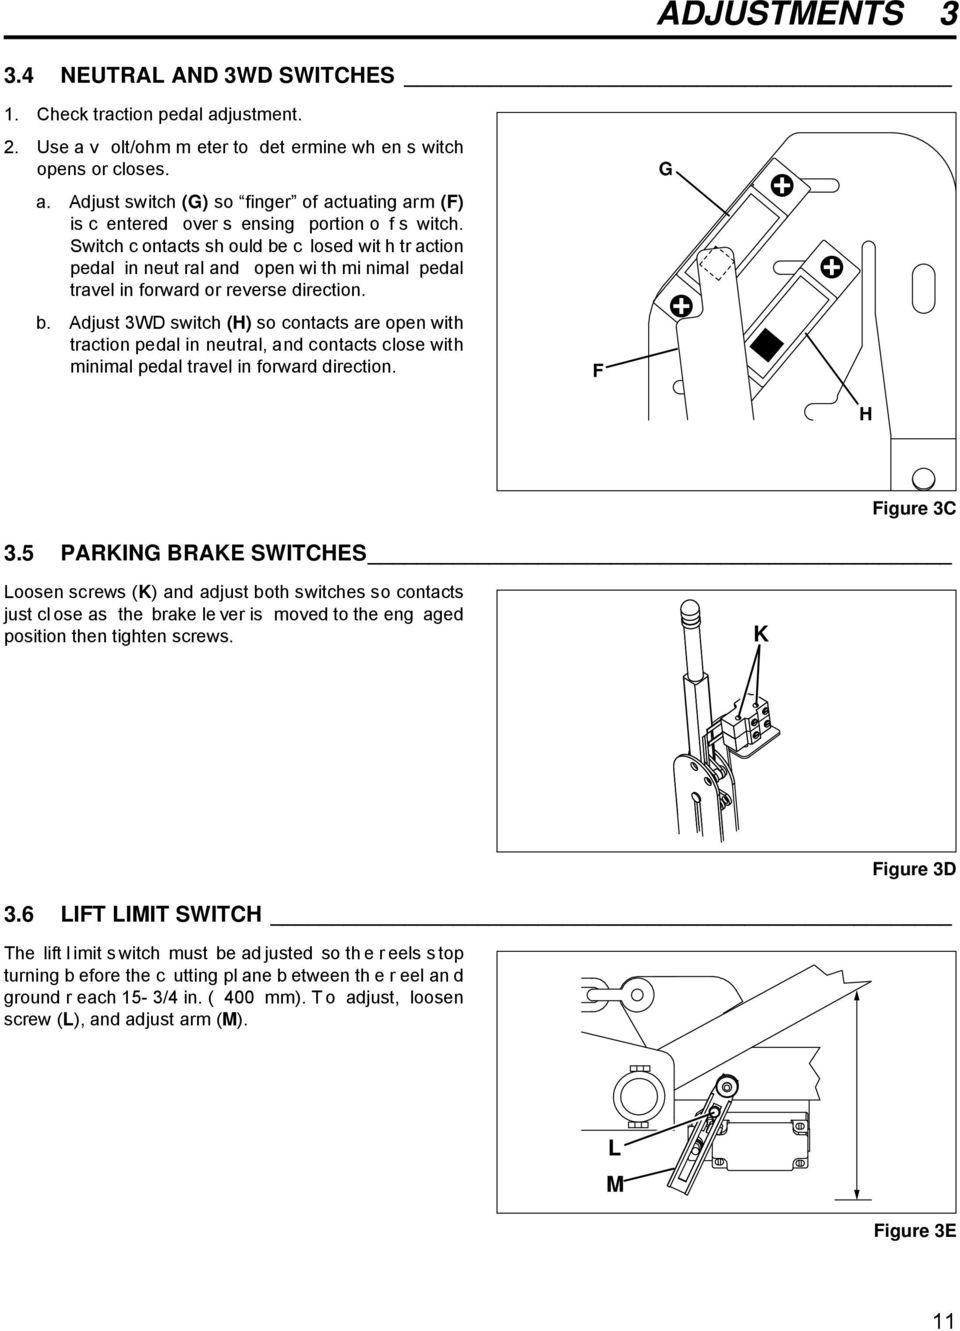 F G H Figure 3C 3.5 PARKING BRAKE SWITCHES Loosen screws (K) and adjust both switches so contacts just cl ose as the brake le ver is moved to the eng aged position then tighten screws. K Figure 3D 3.